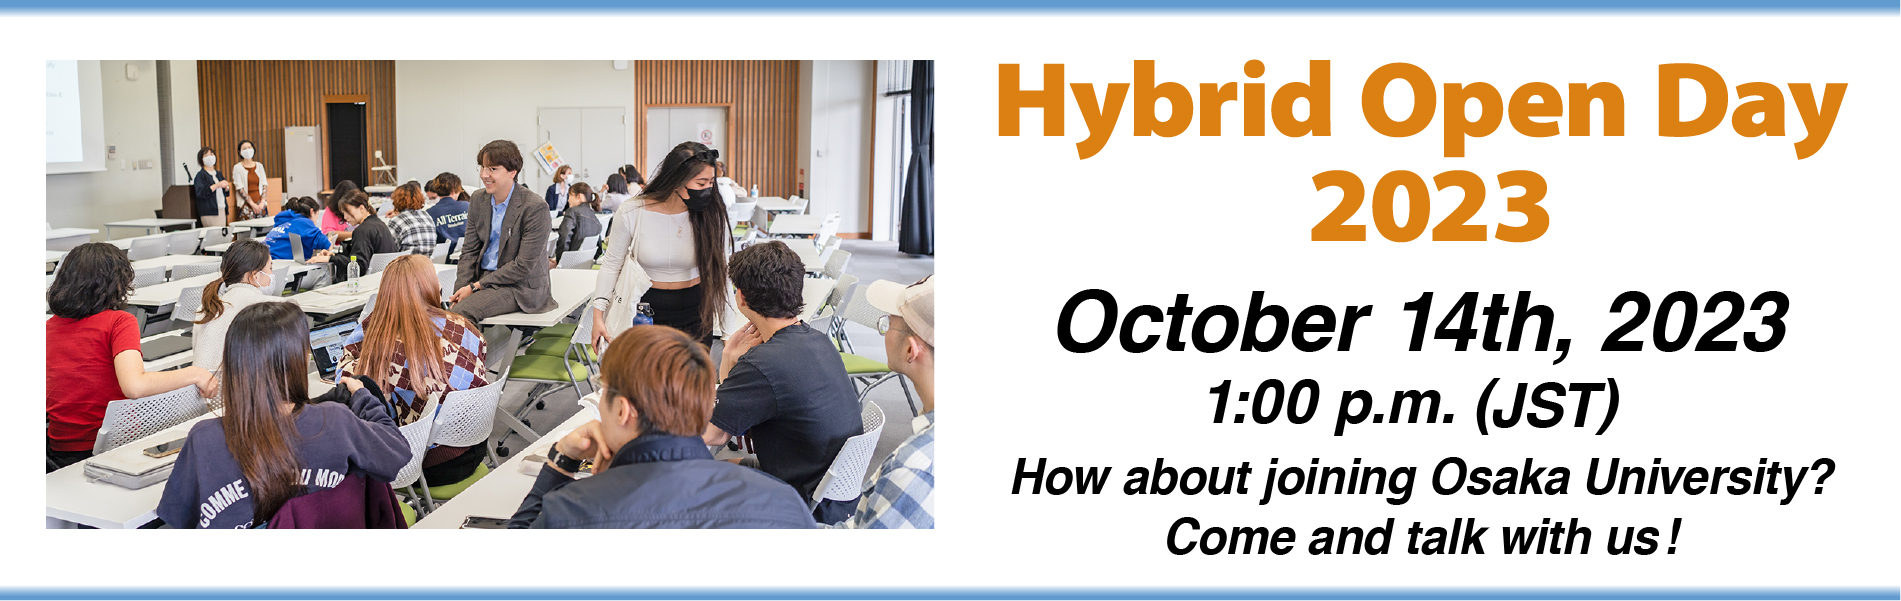 Hybrid Open Day on October 14th, 2023